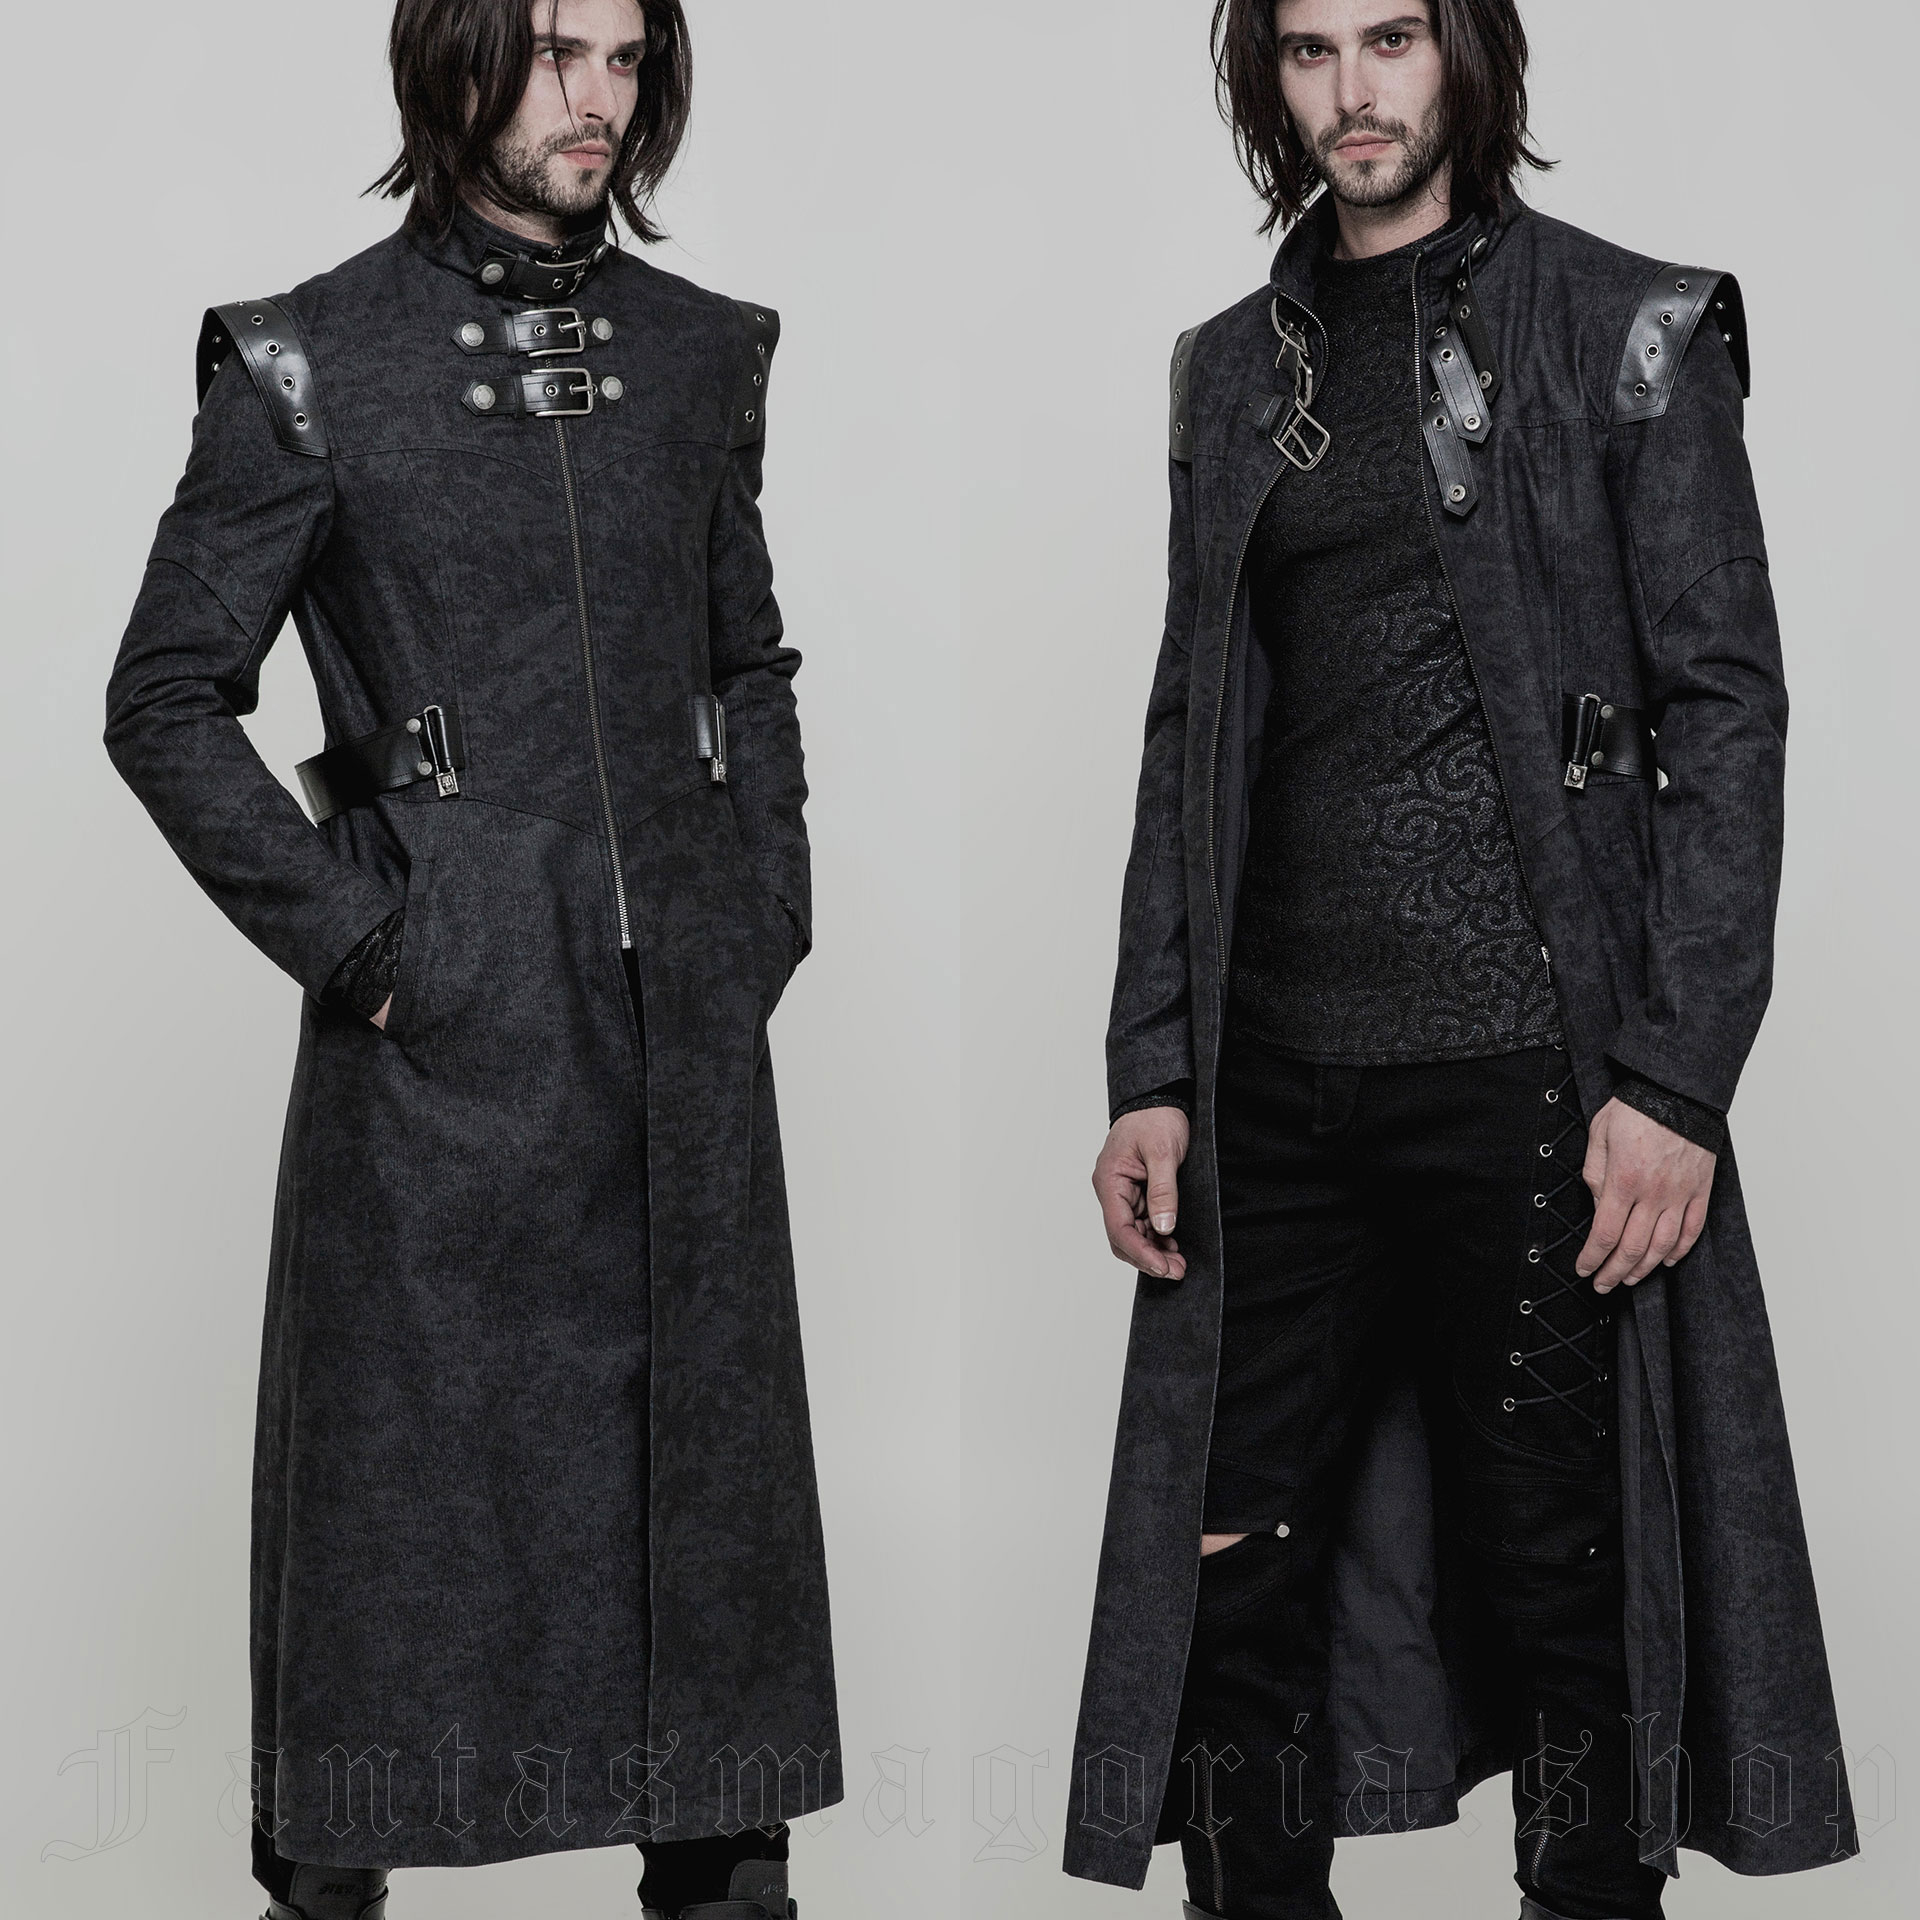 The Smog Coat by Punk Rave brand